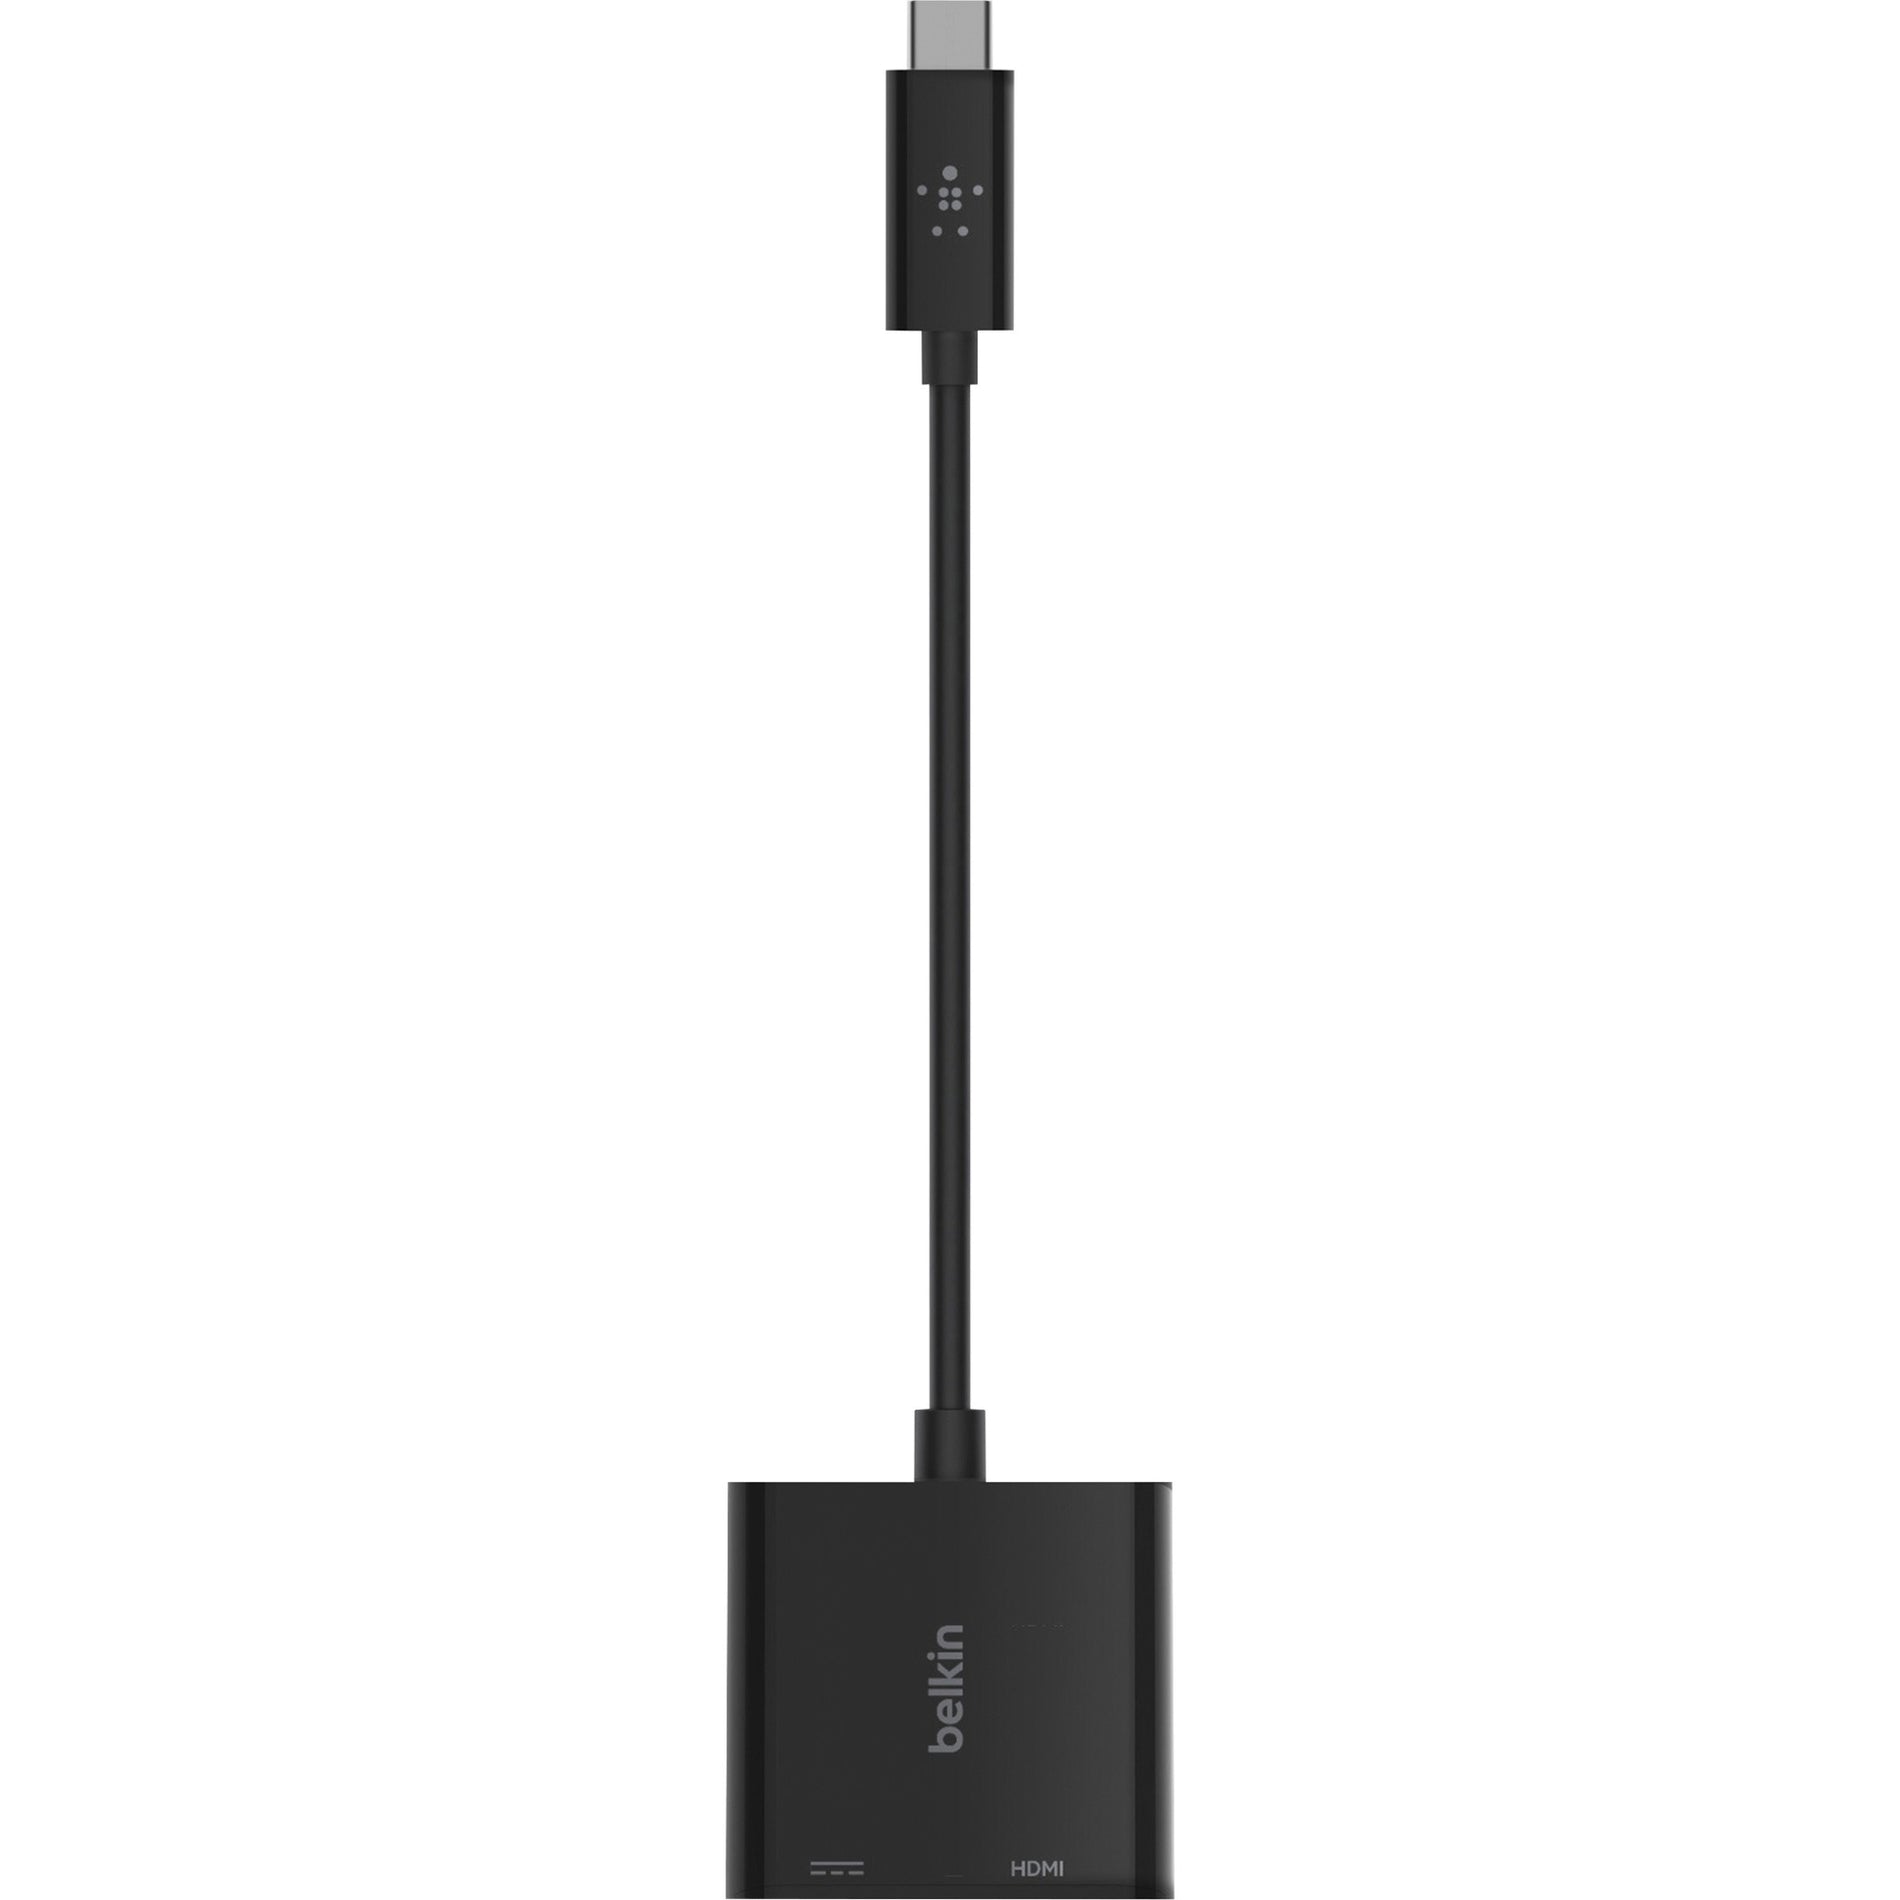 Belkin AVC002BK-BL USB-C to HDMI + Charge Adapter, Plug and Play, 4K Resolution Support